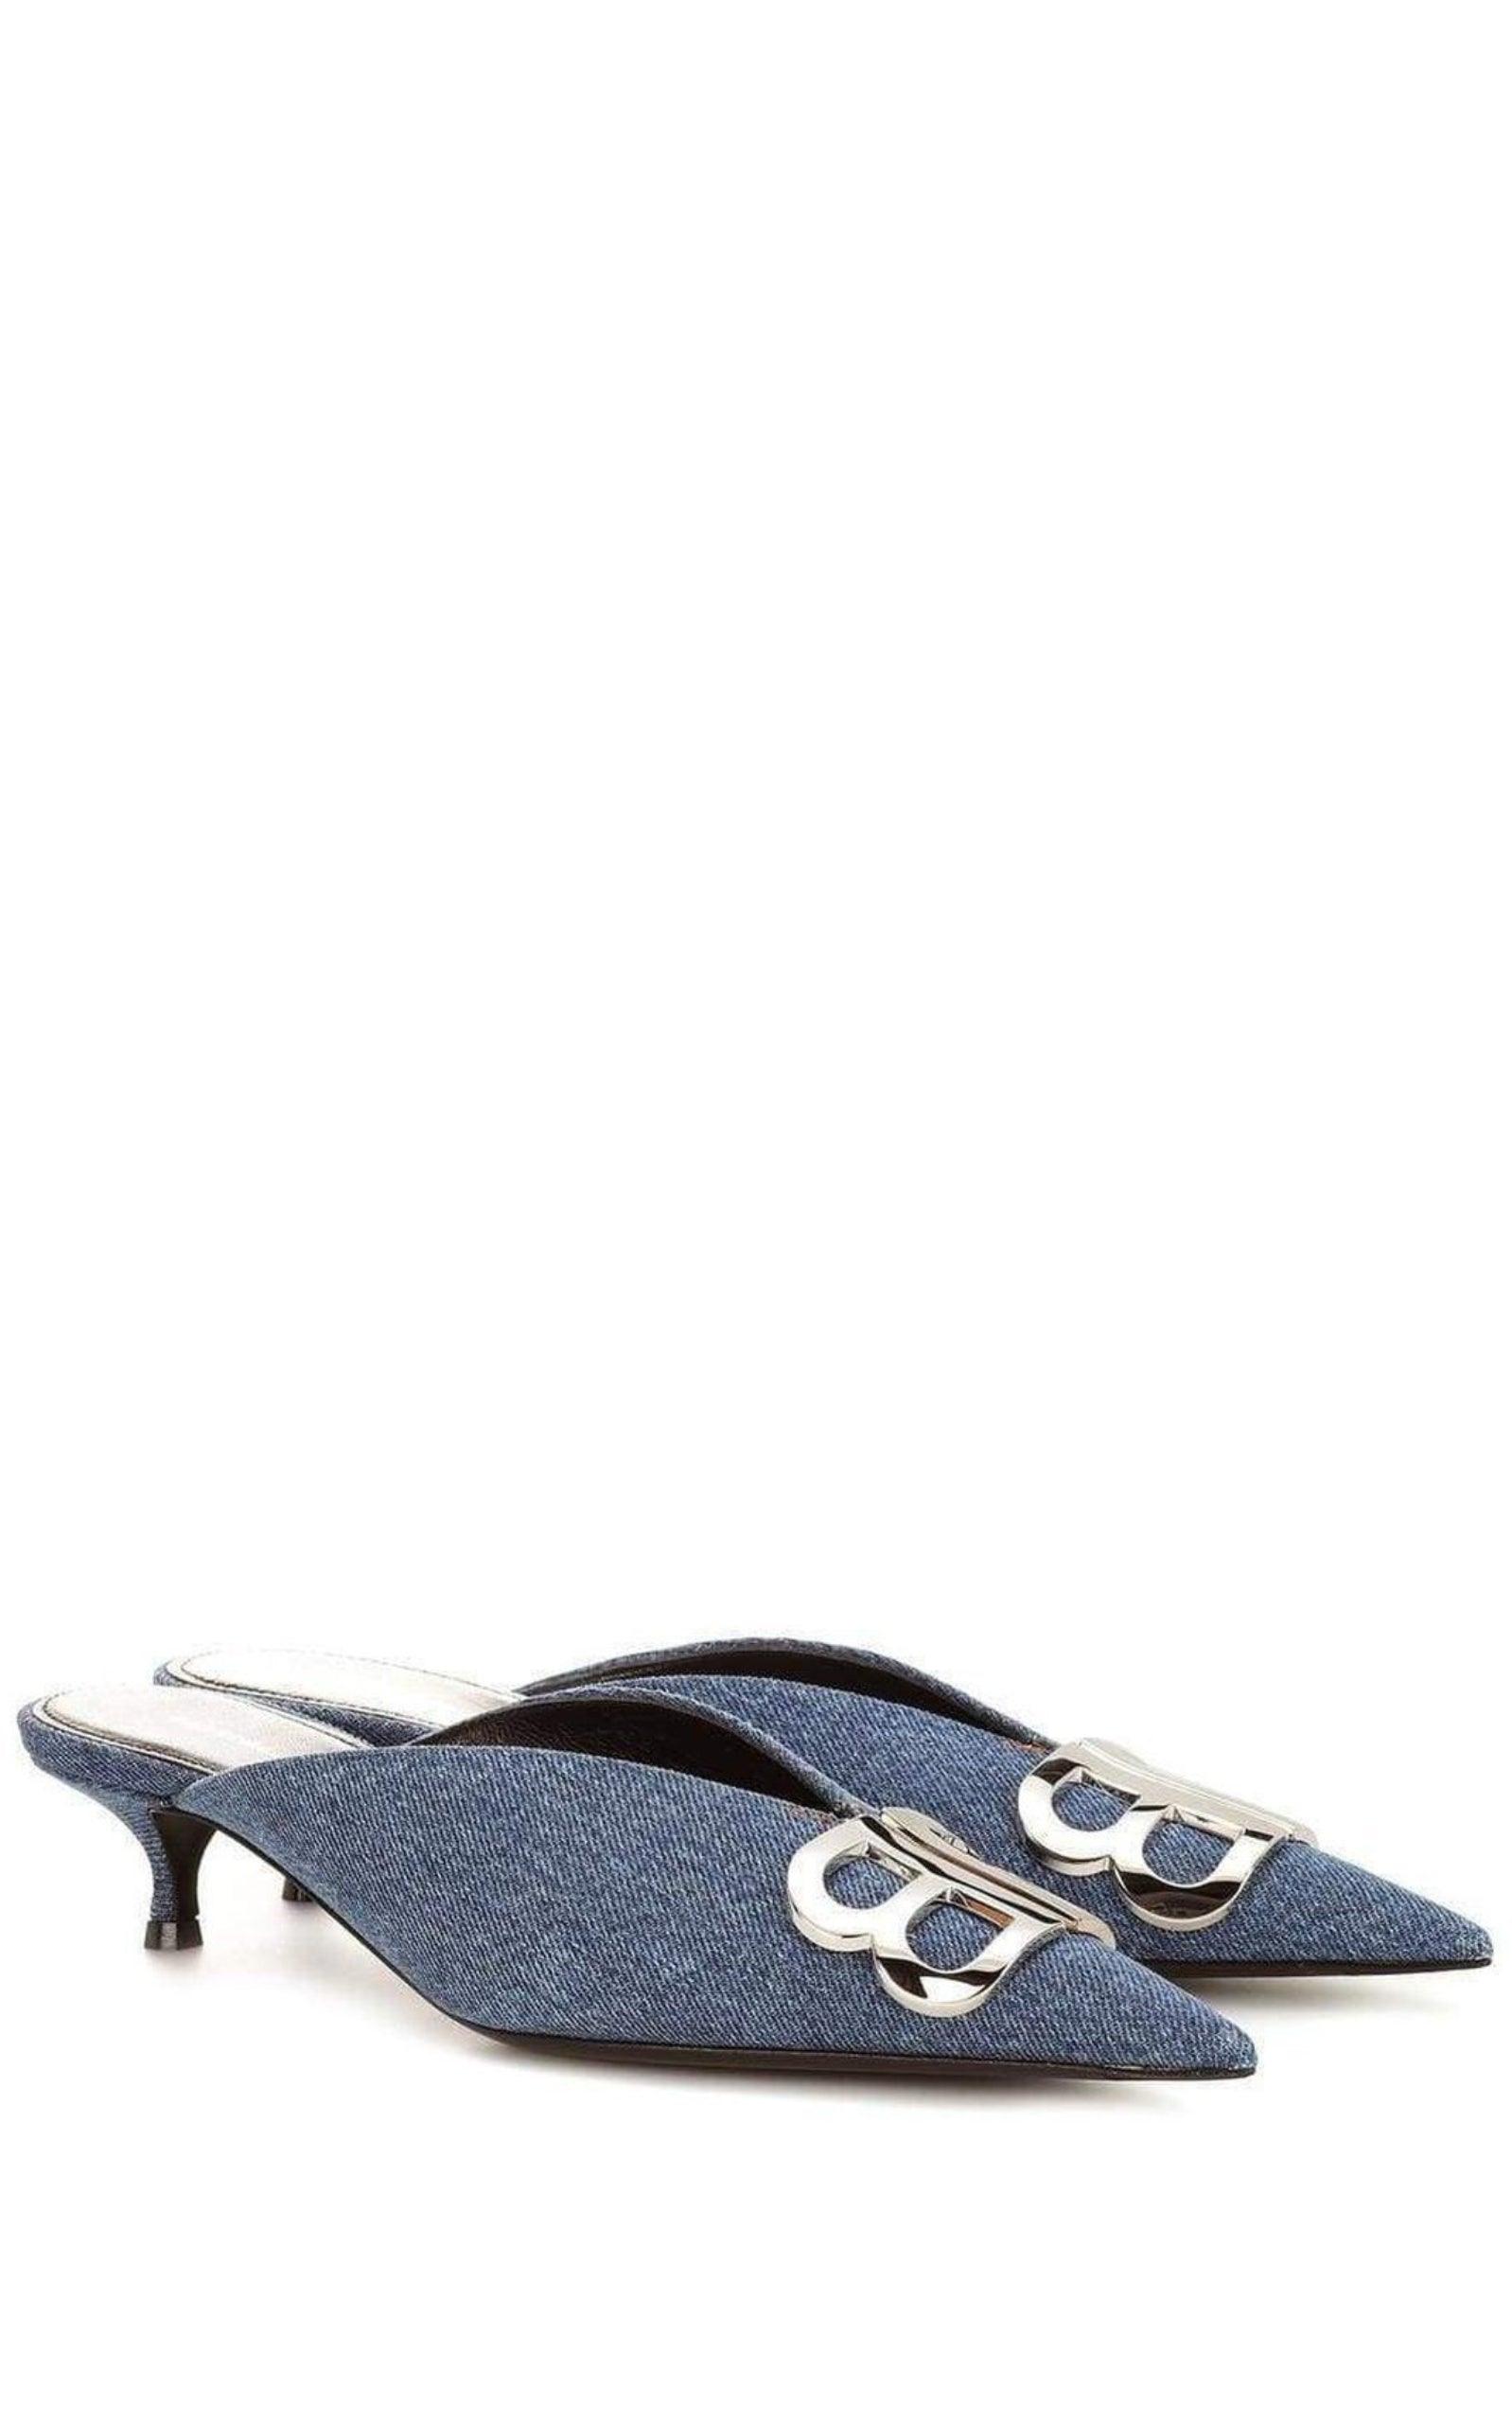 BALENCIAGA Knife buckled leather mules  Sale up to 70 off  THE OUTNET